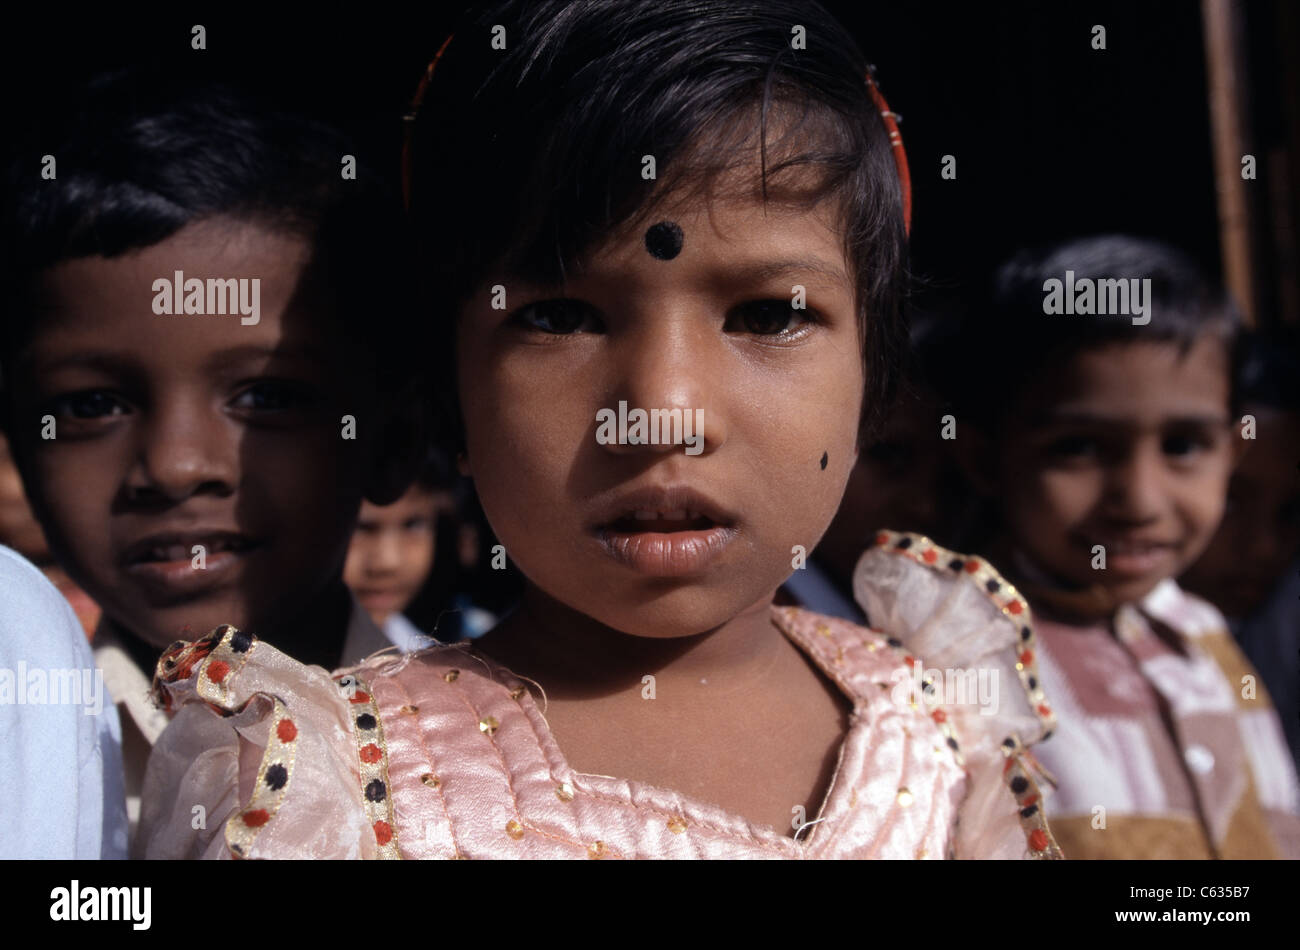 Ethnic Tamil schoolchildren crowd around a camera in Jaffna City, Sri Lanka. The LTTE has been fighting for a separate state. Stock Photo